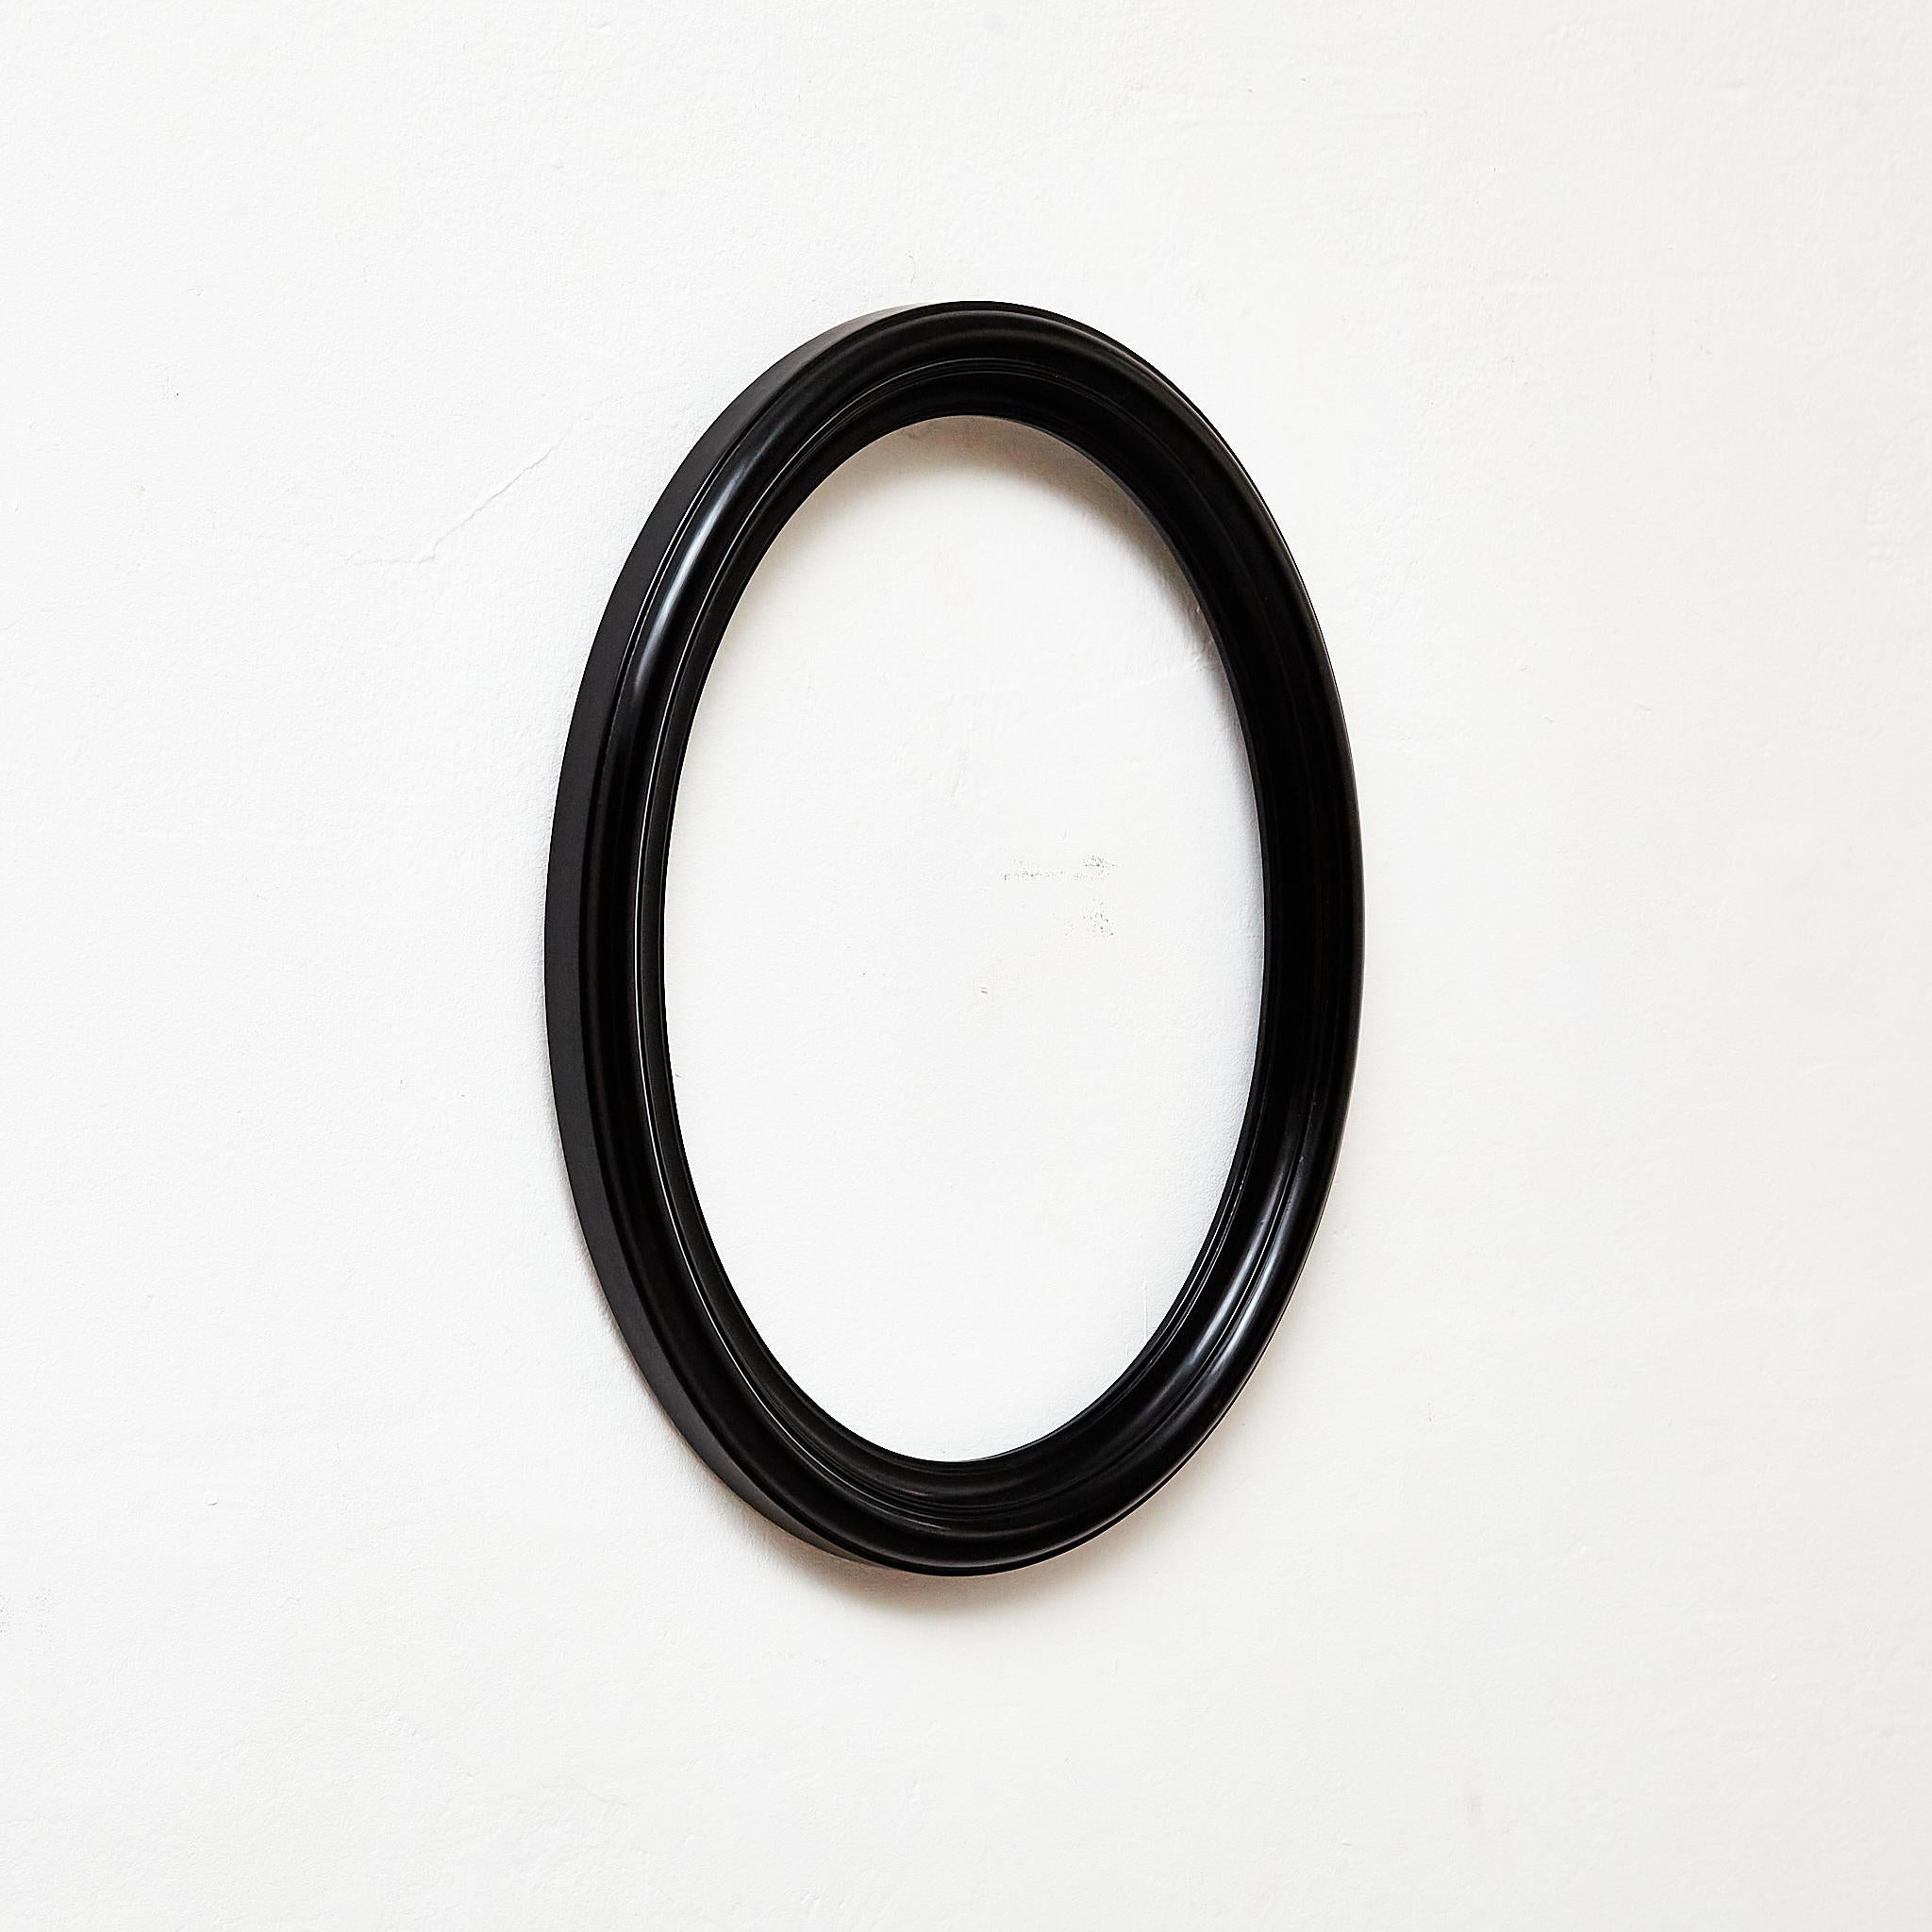 Antique Black Oval Wood Laquered Frame.

Manufactured France, circa 1950.

Materials:
Wood

Dimensions: 
D 3 x W 35 cm x H 45 cm

In original condition, with minor wear consistent with age and use, preserving a beautiful patina.

Important